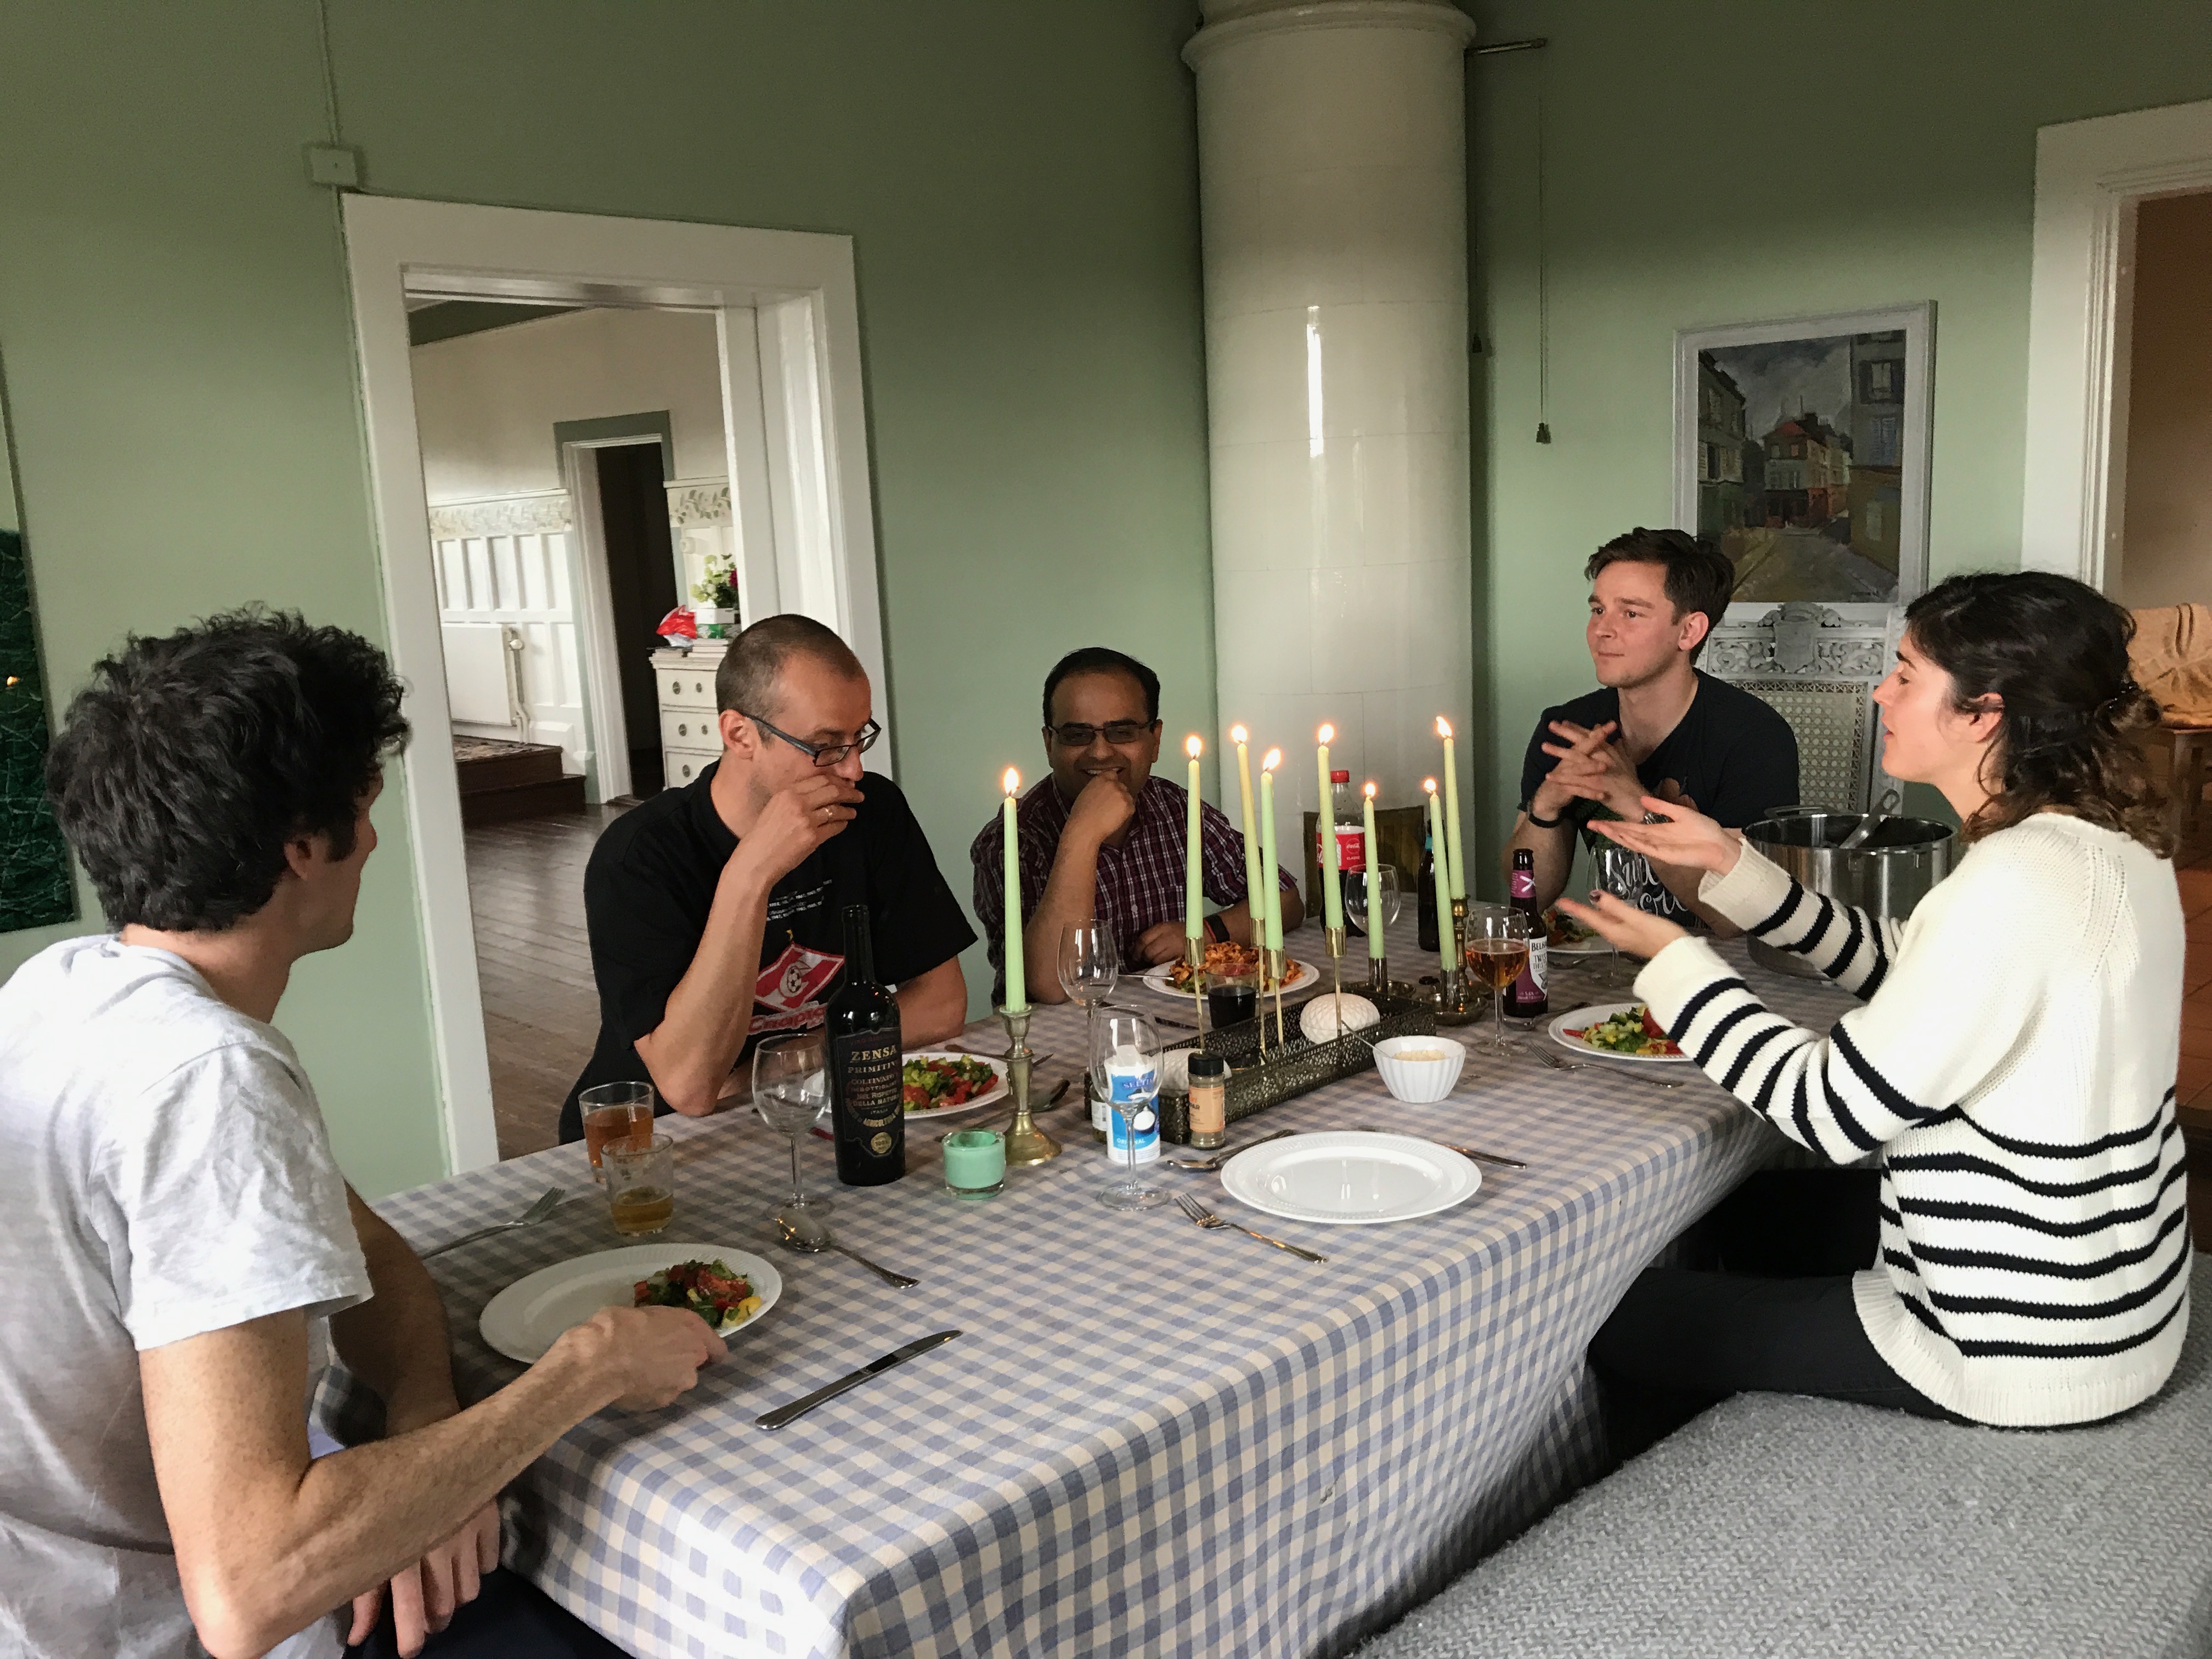 Image 2. Lunch in the dining room. Sam, Kostya, Navneet, Ulrich and Berta.  